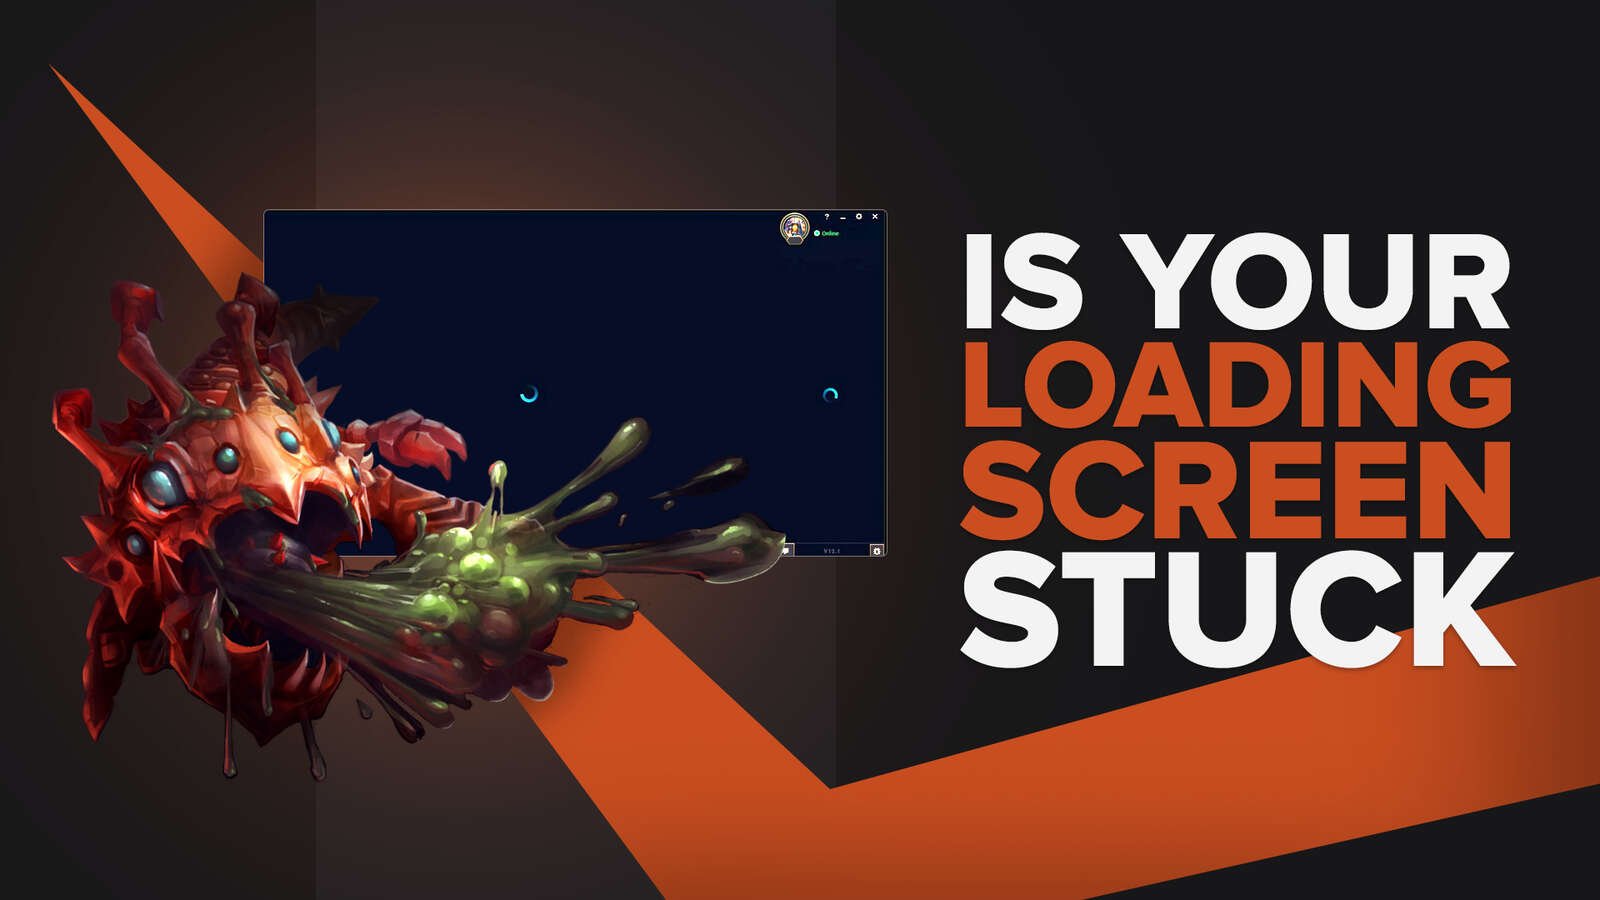 LoL Loading Screen Stuck? Here Are 4 Things You Can Do